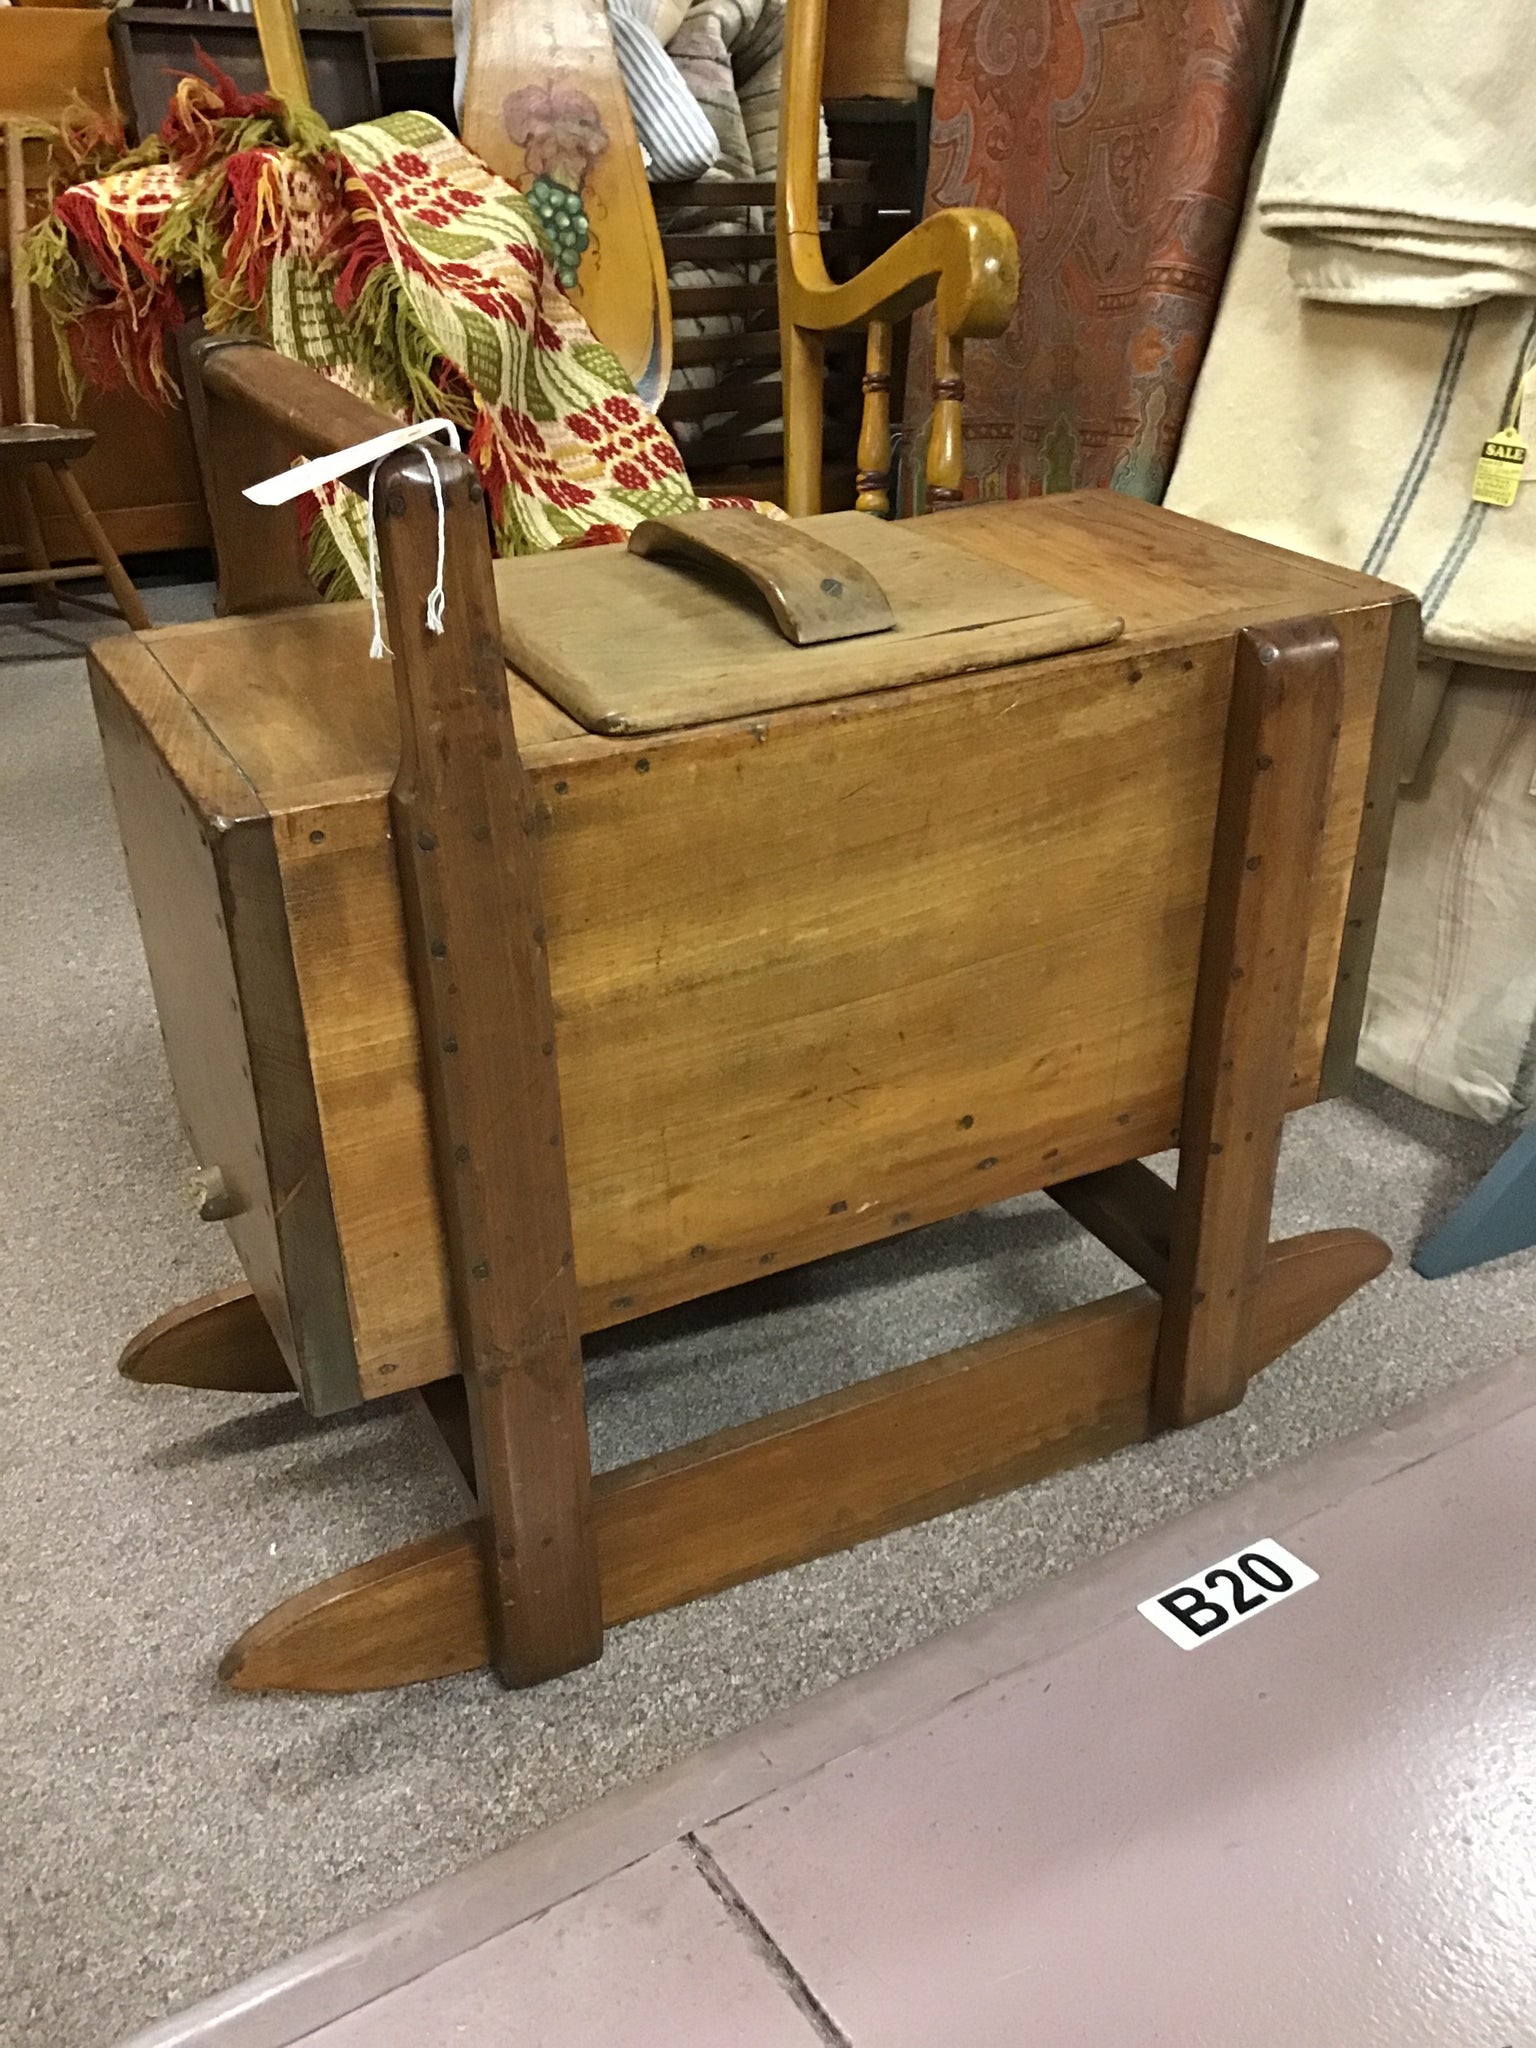 Rocking Butter Churn Converted to Table